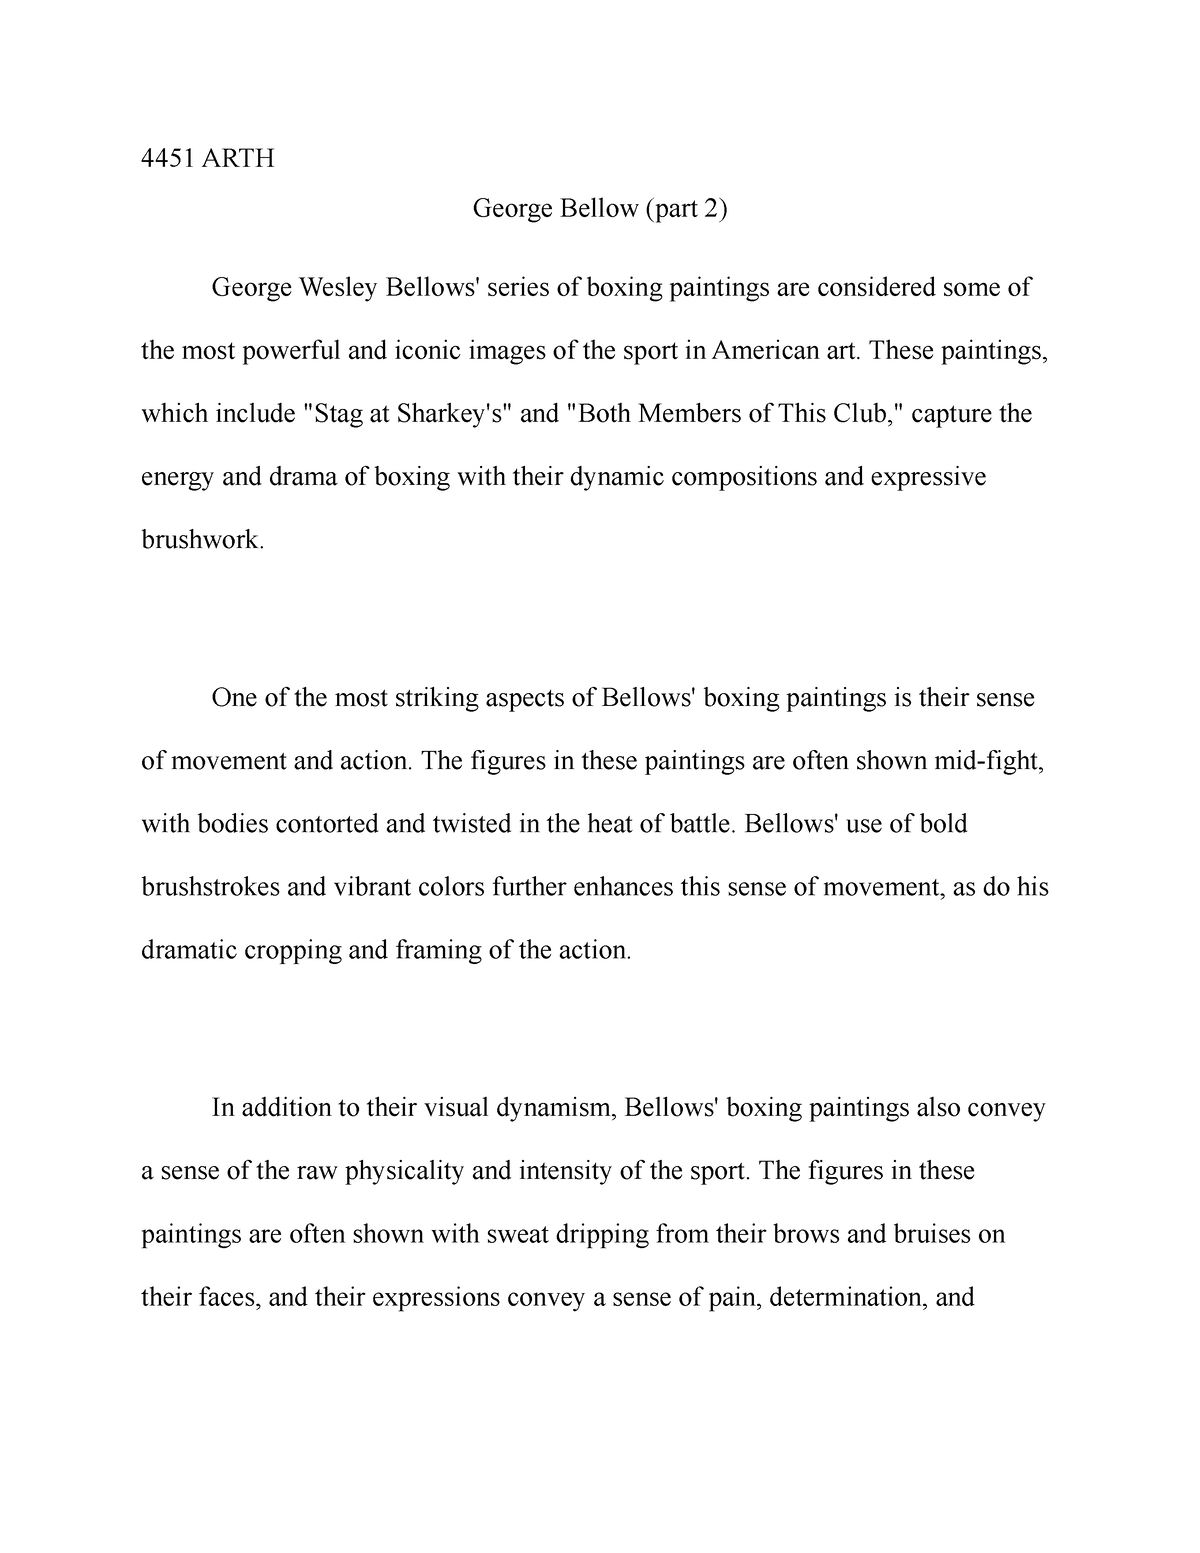 Bellow 3 - 4451 ARTH George Bellow (part 2) George Wesley Bellows ...